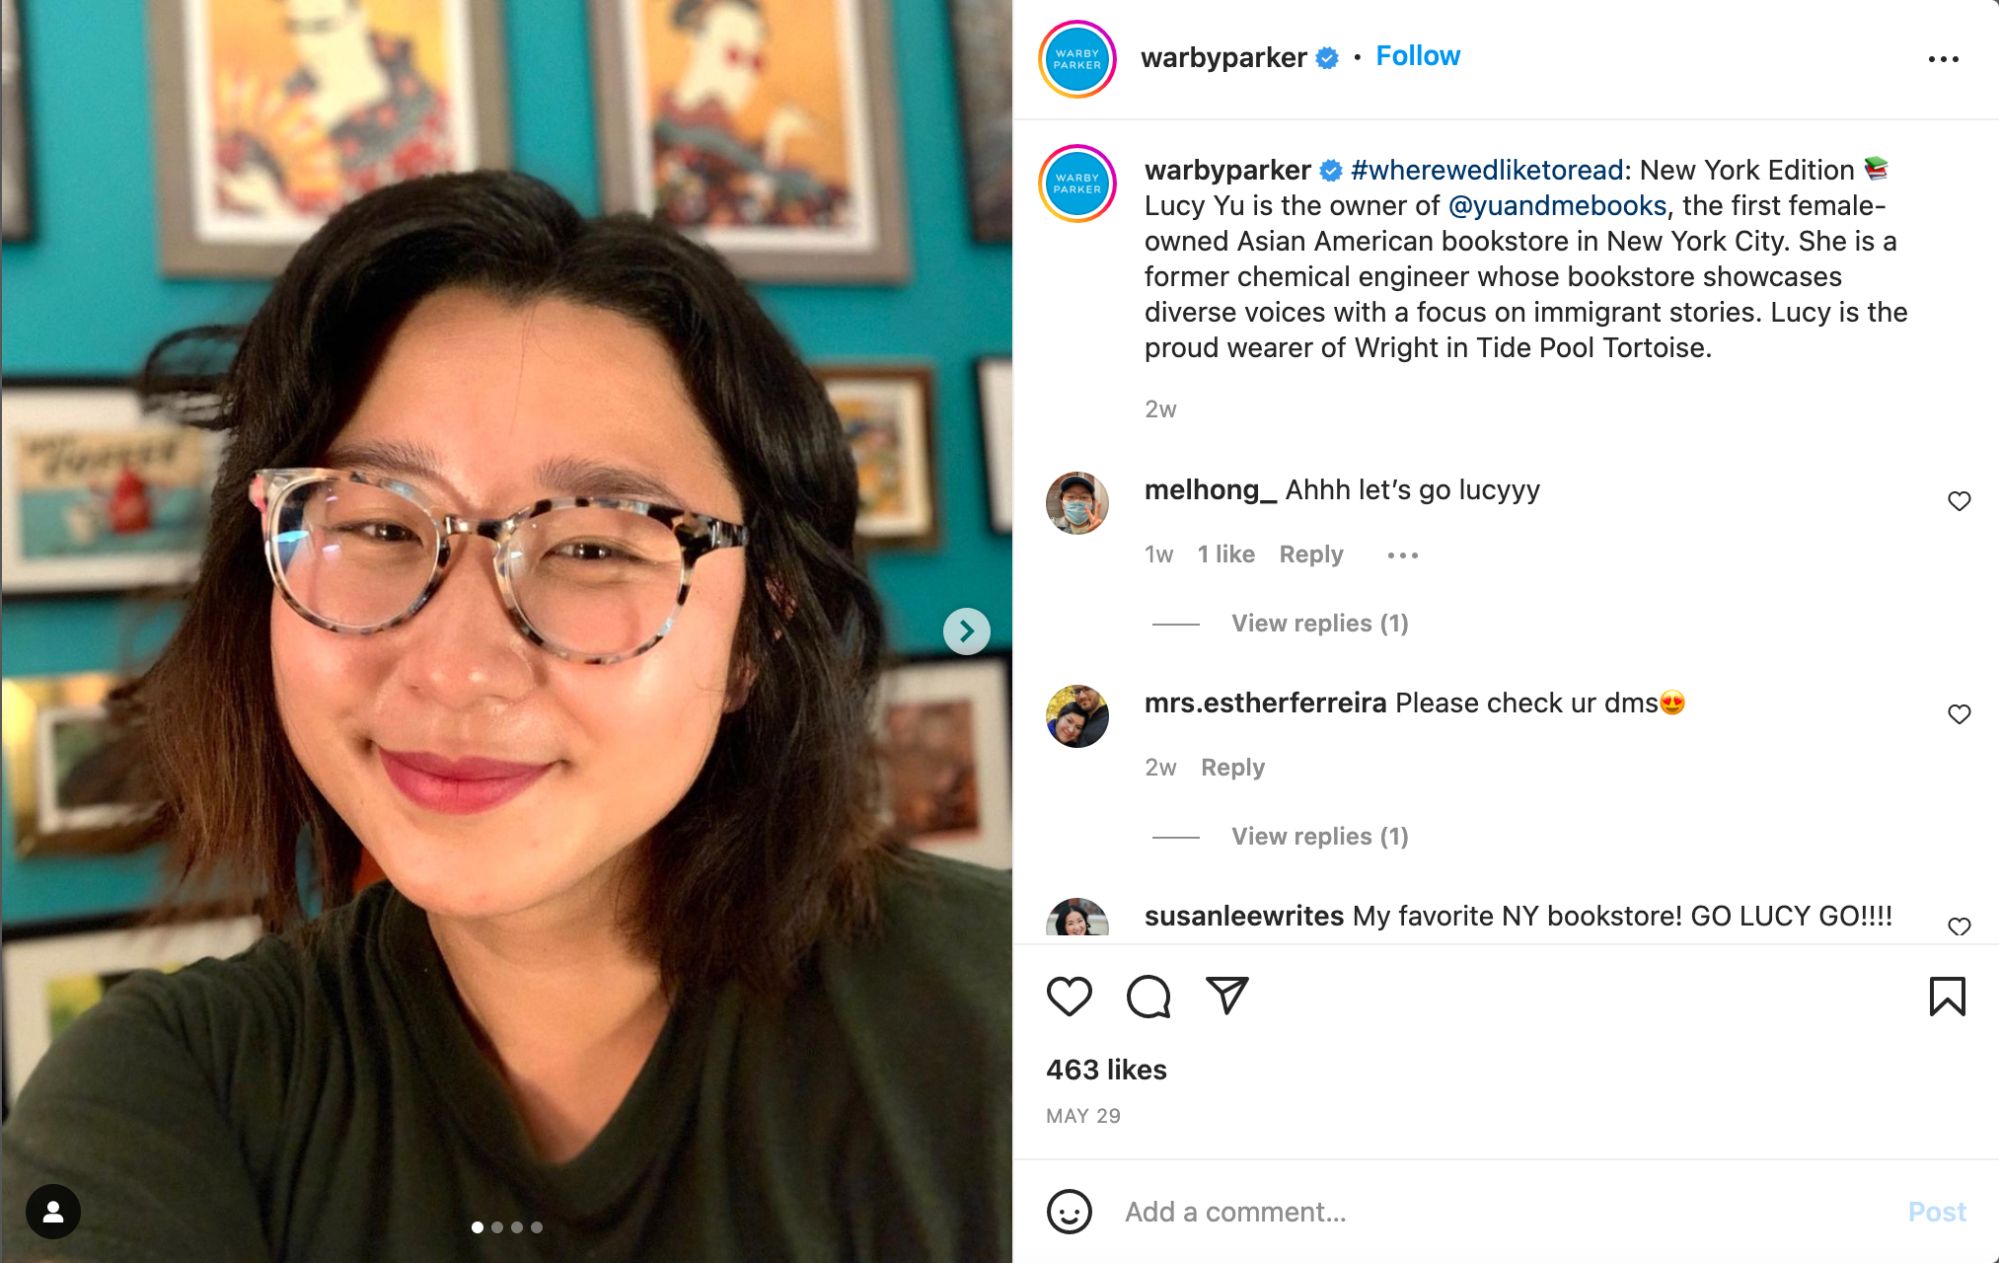 Instagram post from the Warby Parker brand